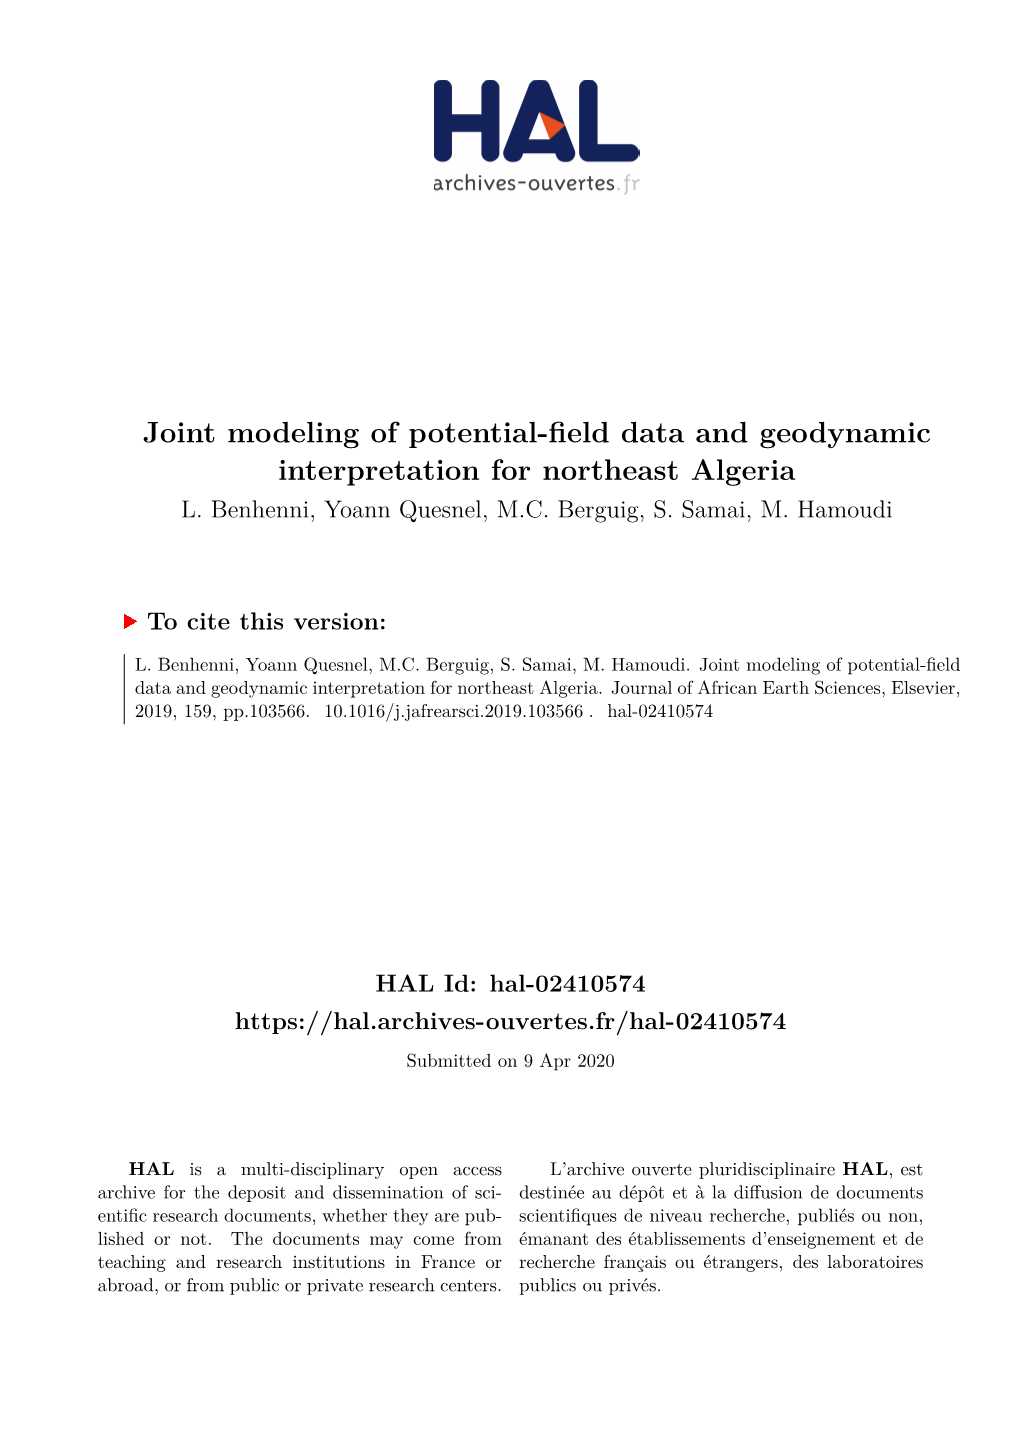 Joint Modeling of Potential-Field Data and Geodynamic Interpretation for Northeast Algeria L